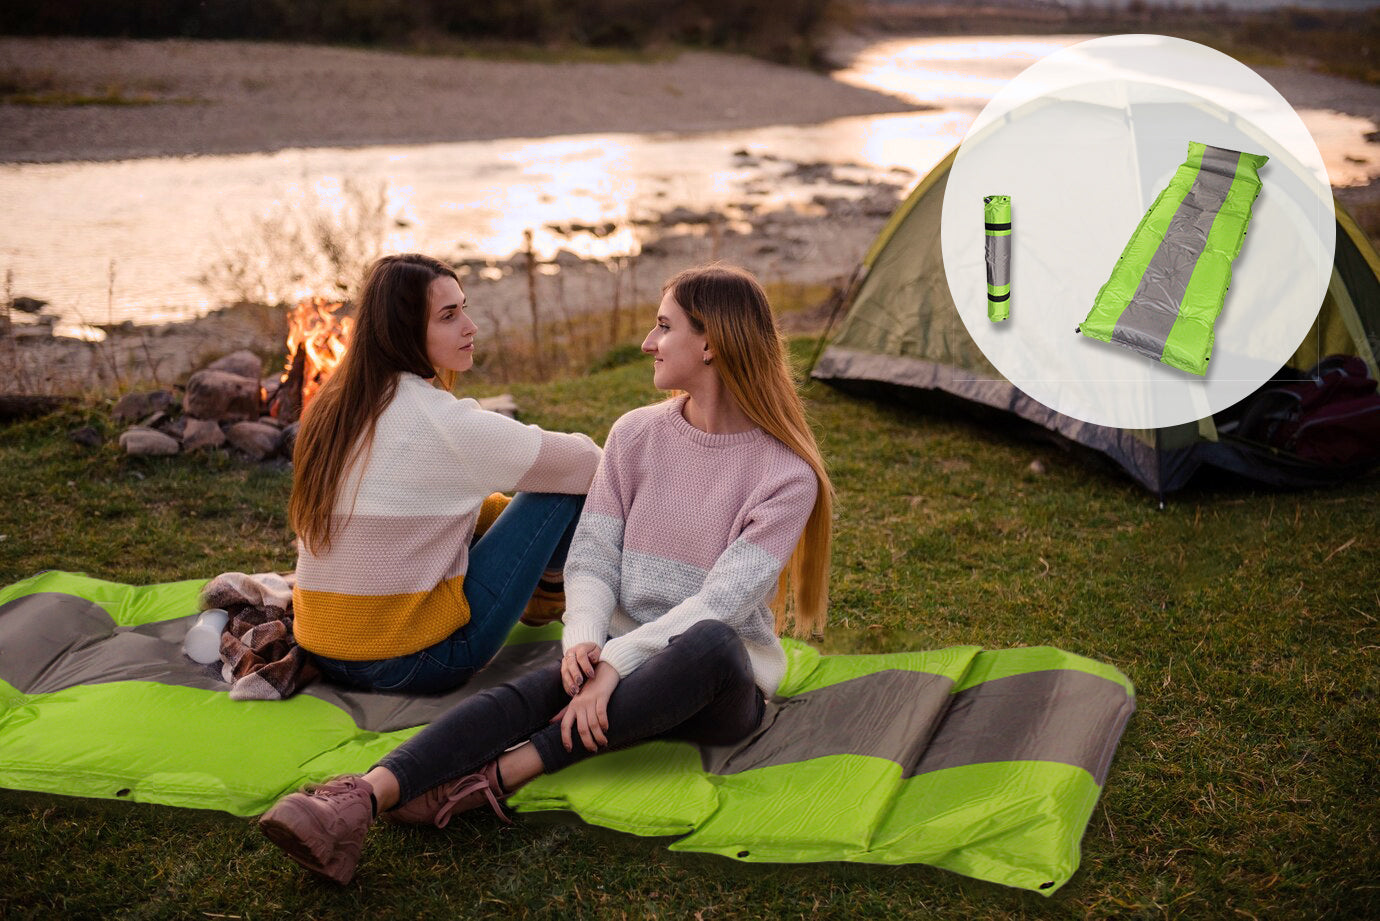 184x60cm Self-Inflating Single Camping Mattress with Inflatable Headrest